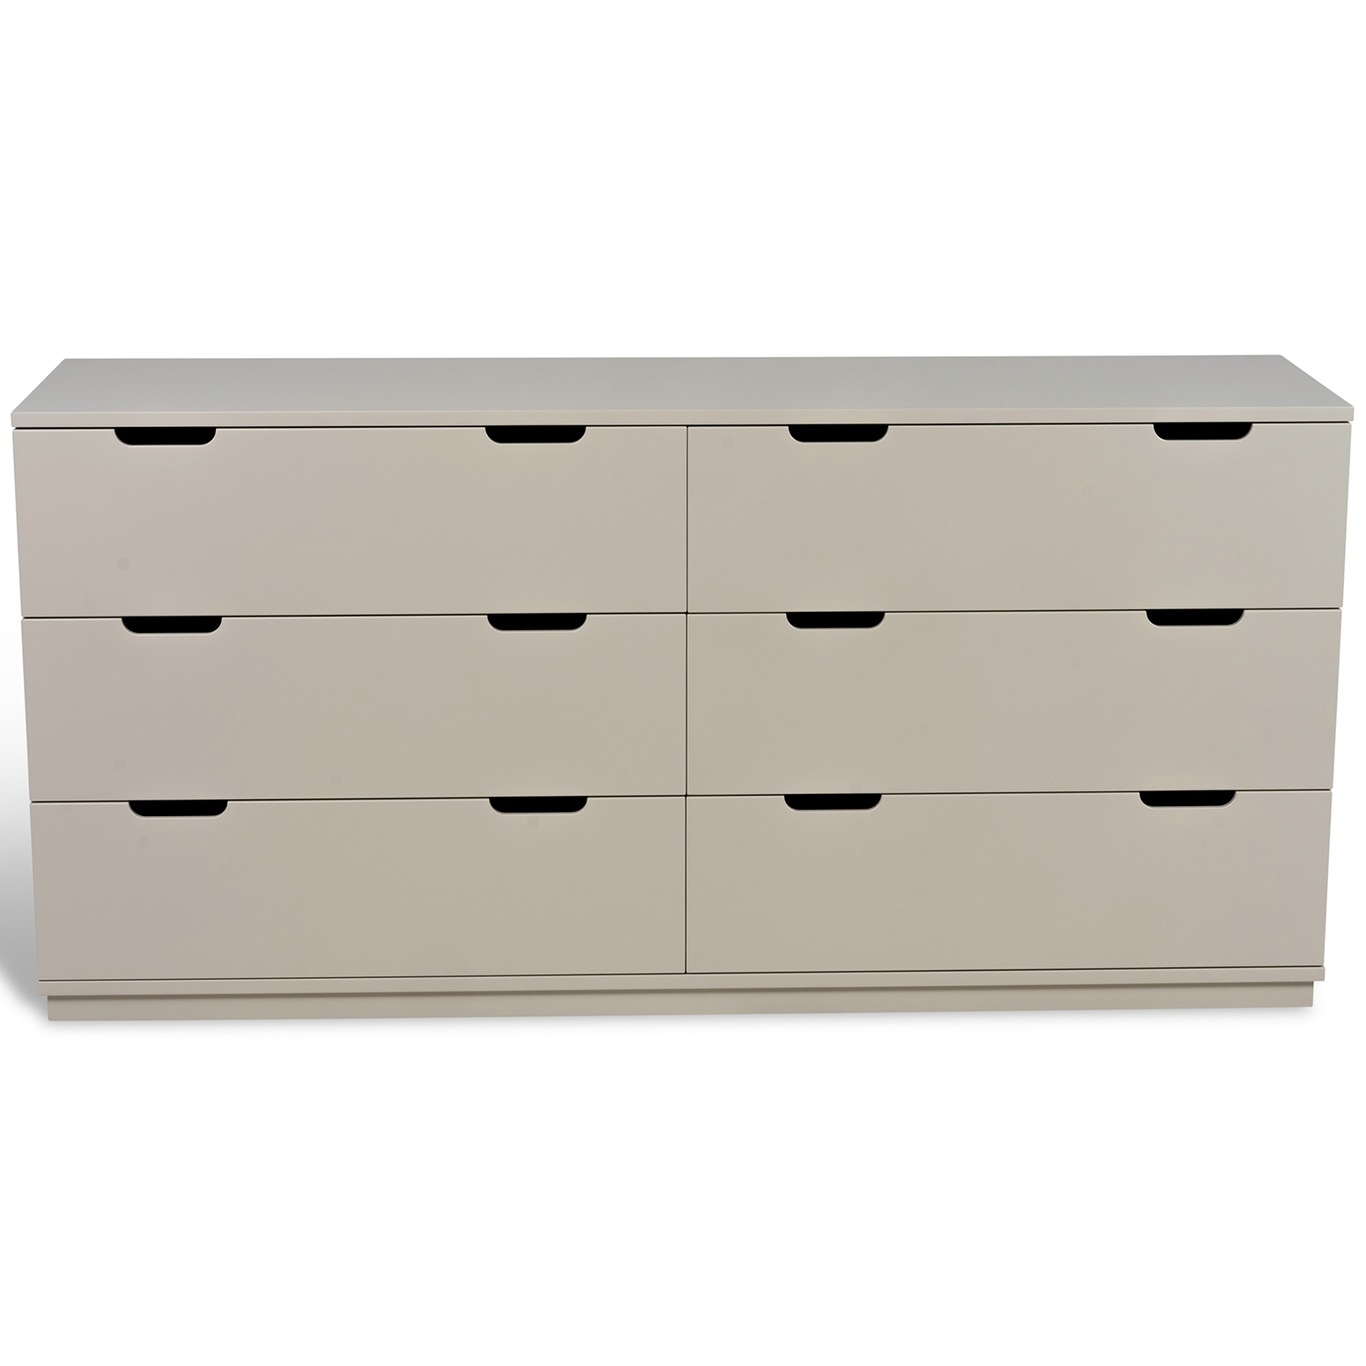 Aoko Chest Of Drawers With 6 Drawers, Beige